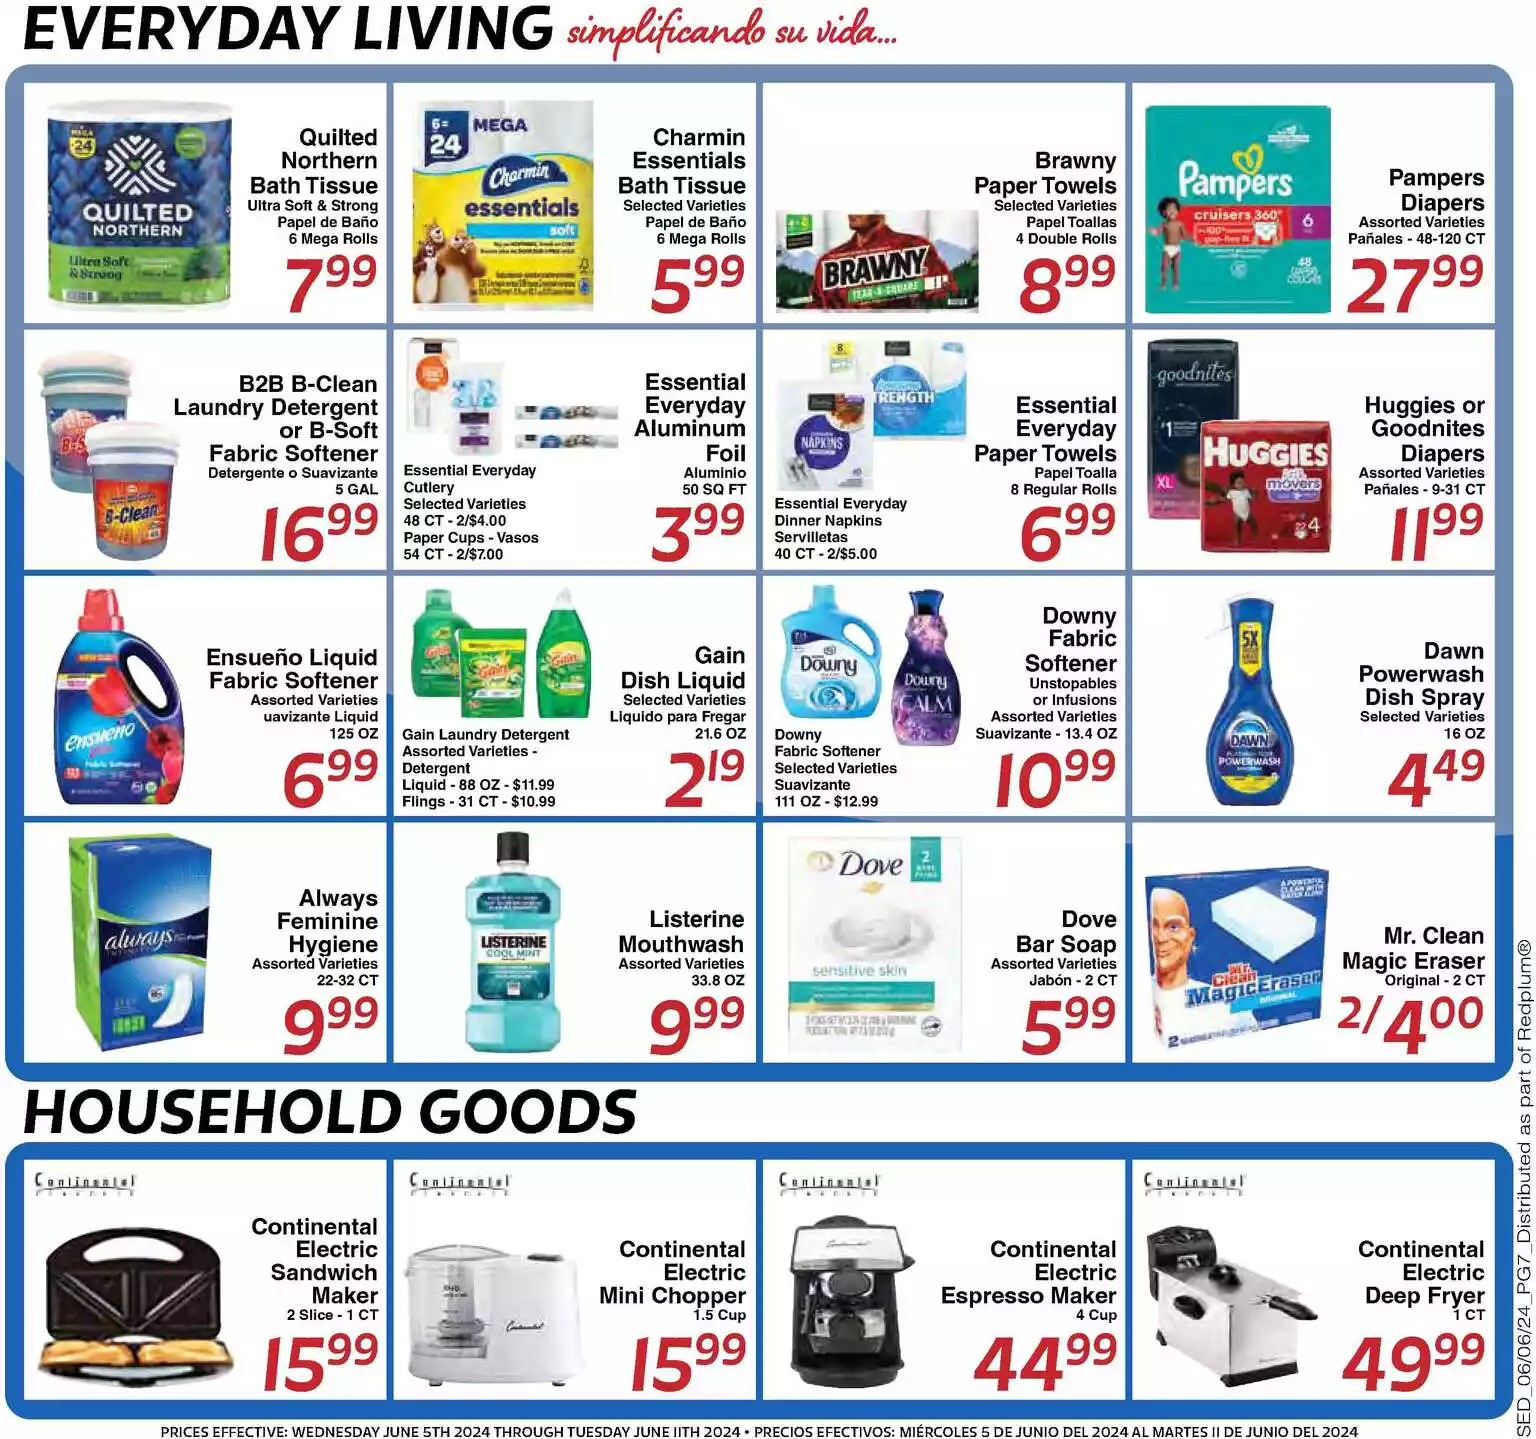 Sedano's July 2024 Weekly Sales, Deals, Discounts and Digital Coupons.